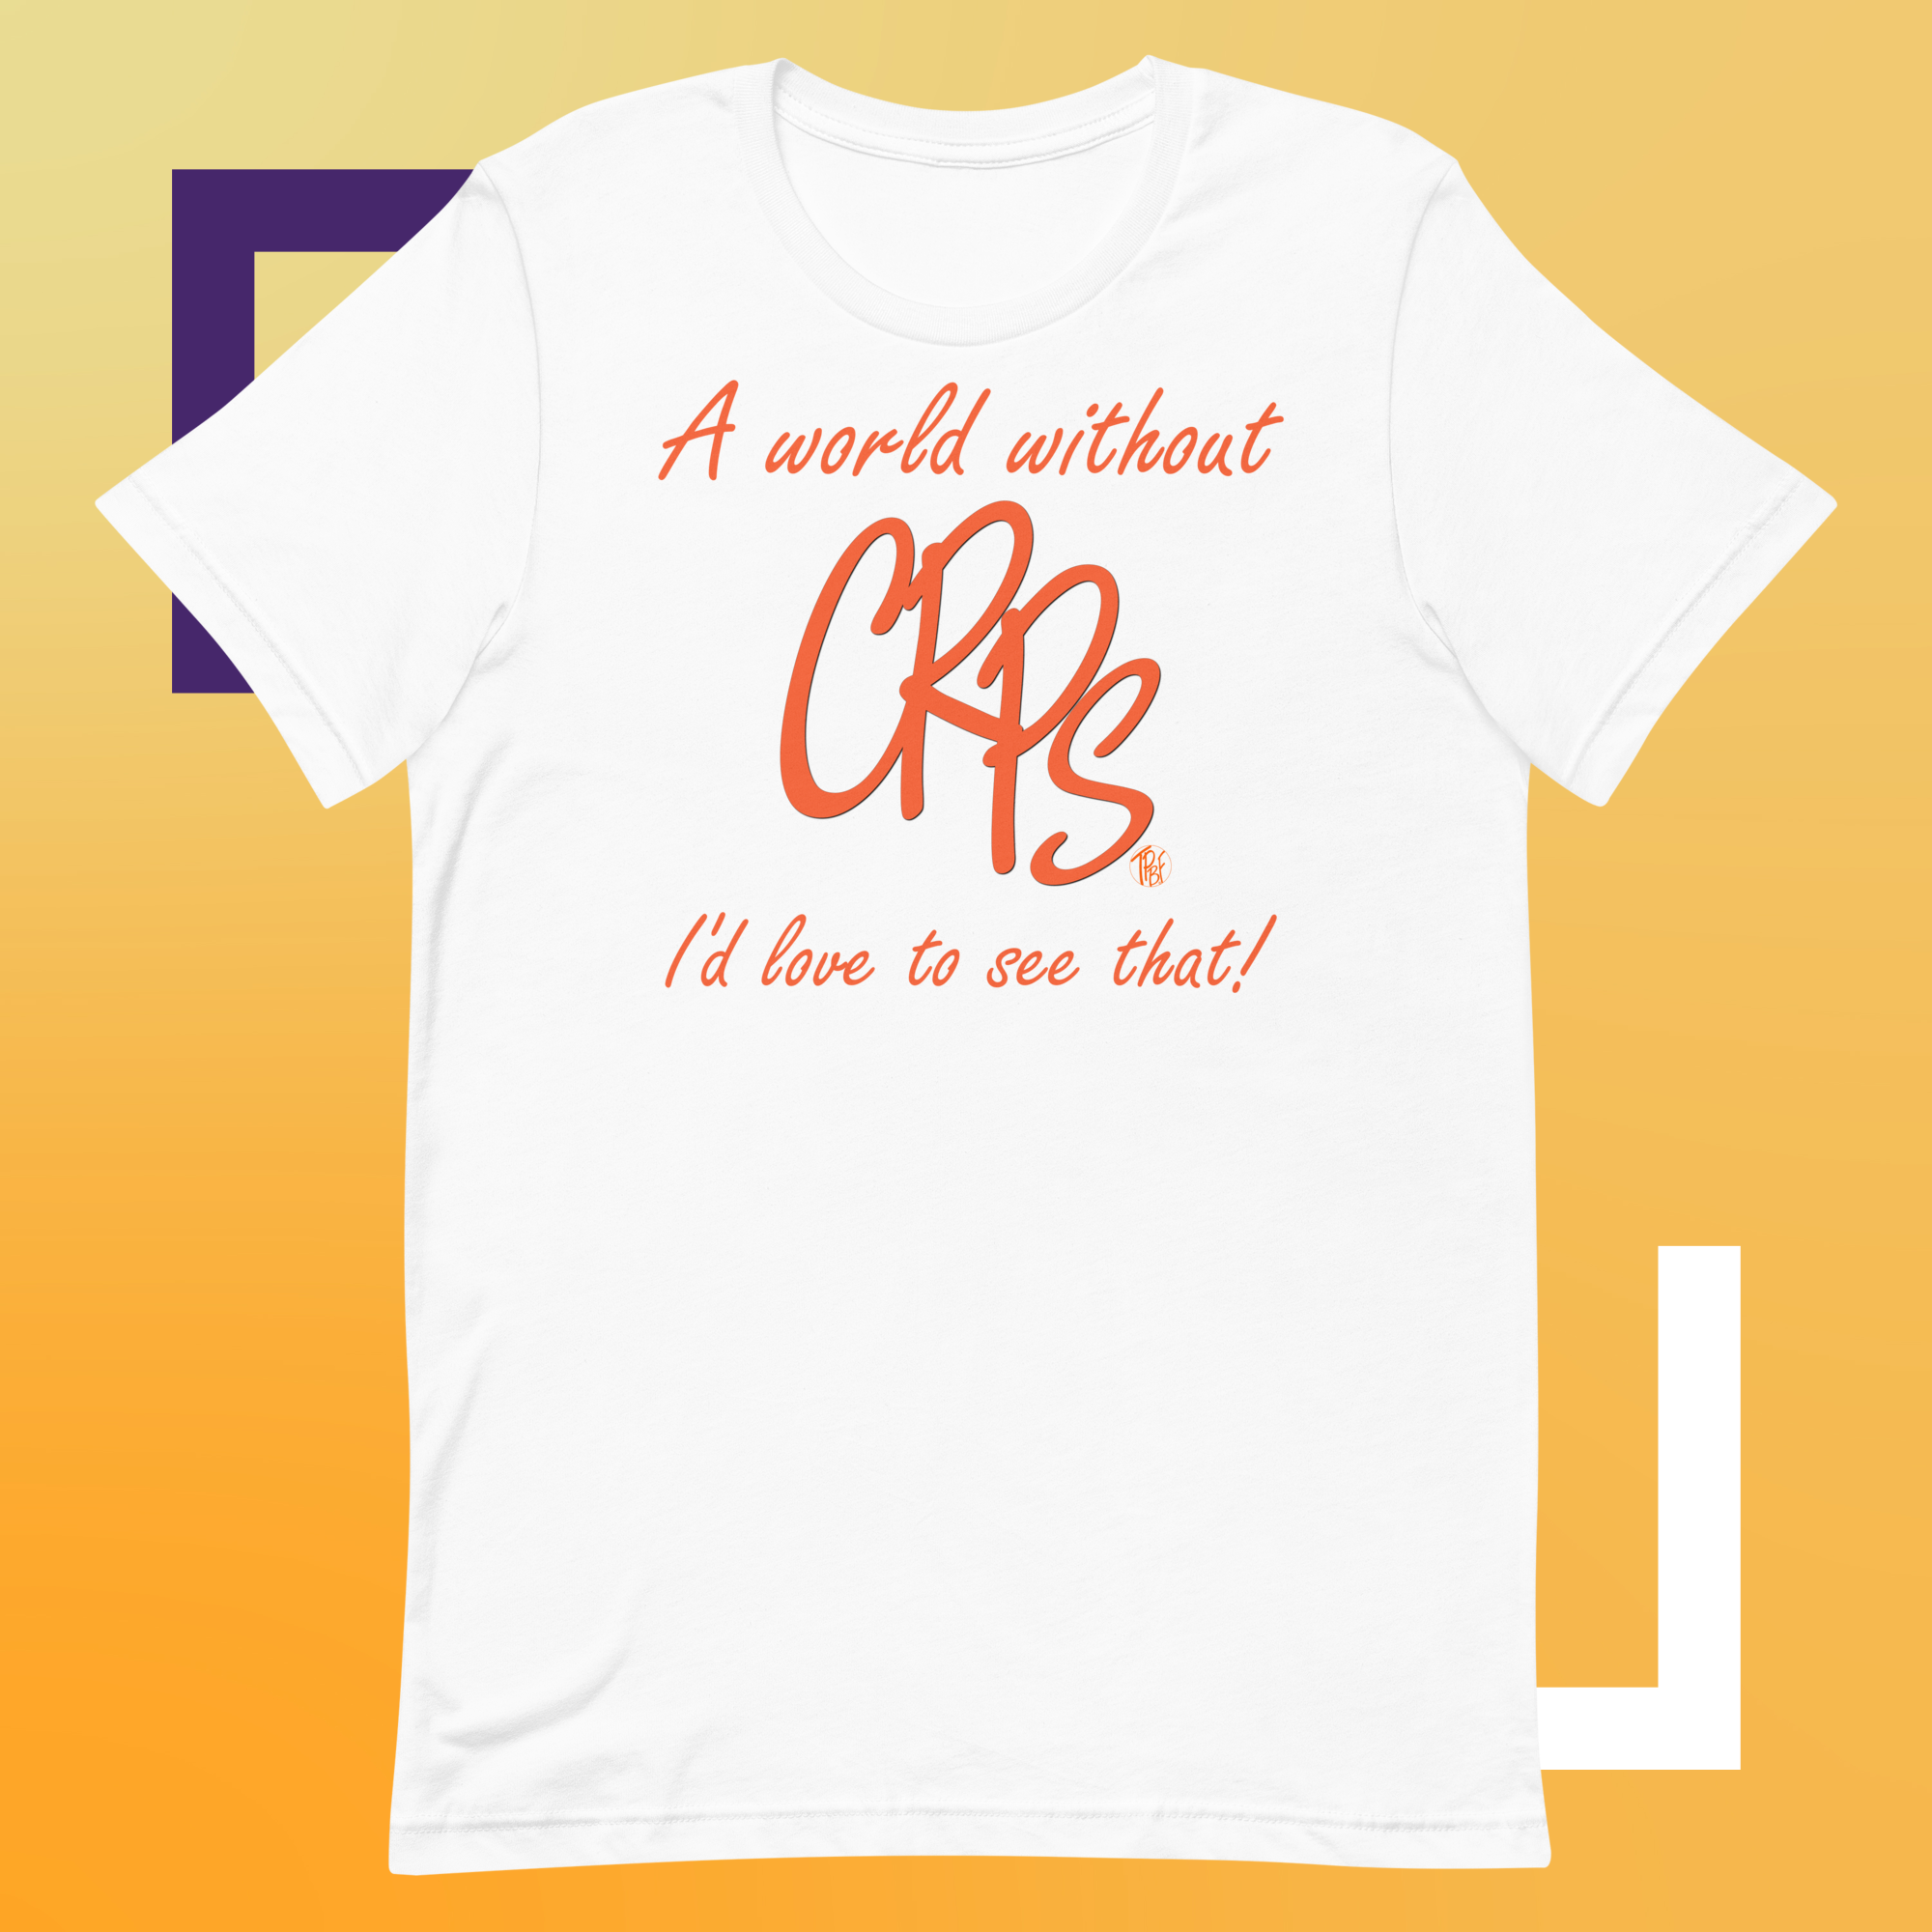 Quality white uni-sex t-shirt with the words "A world without CRPS I'd Like to see that!" written in orange printed on the back.